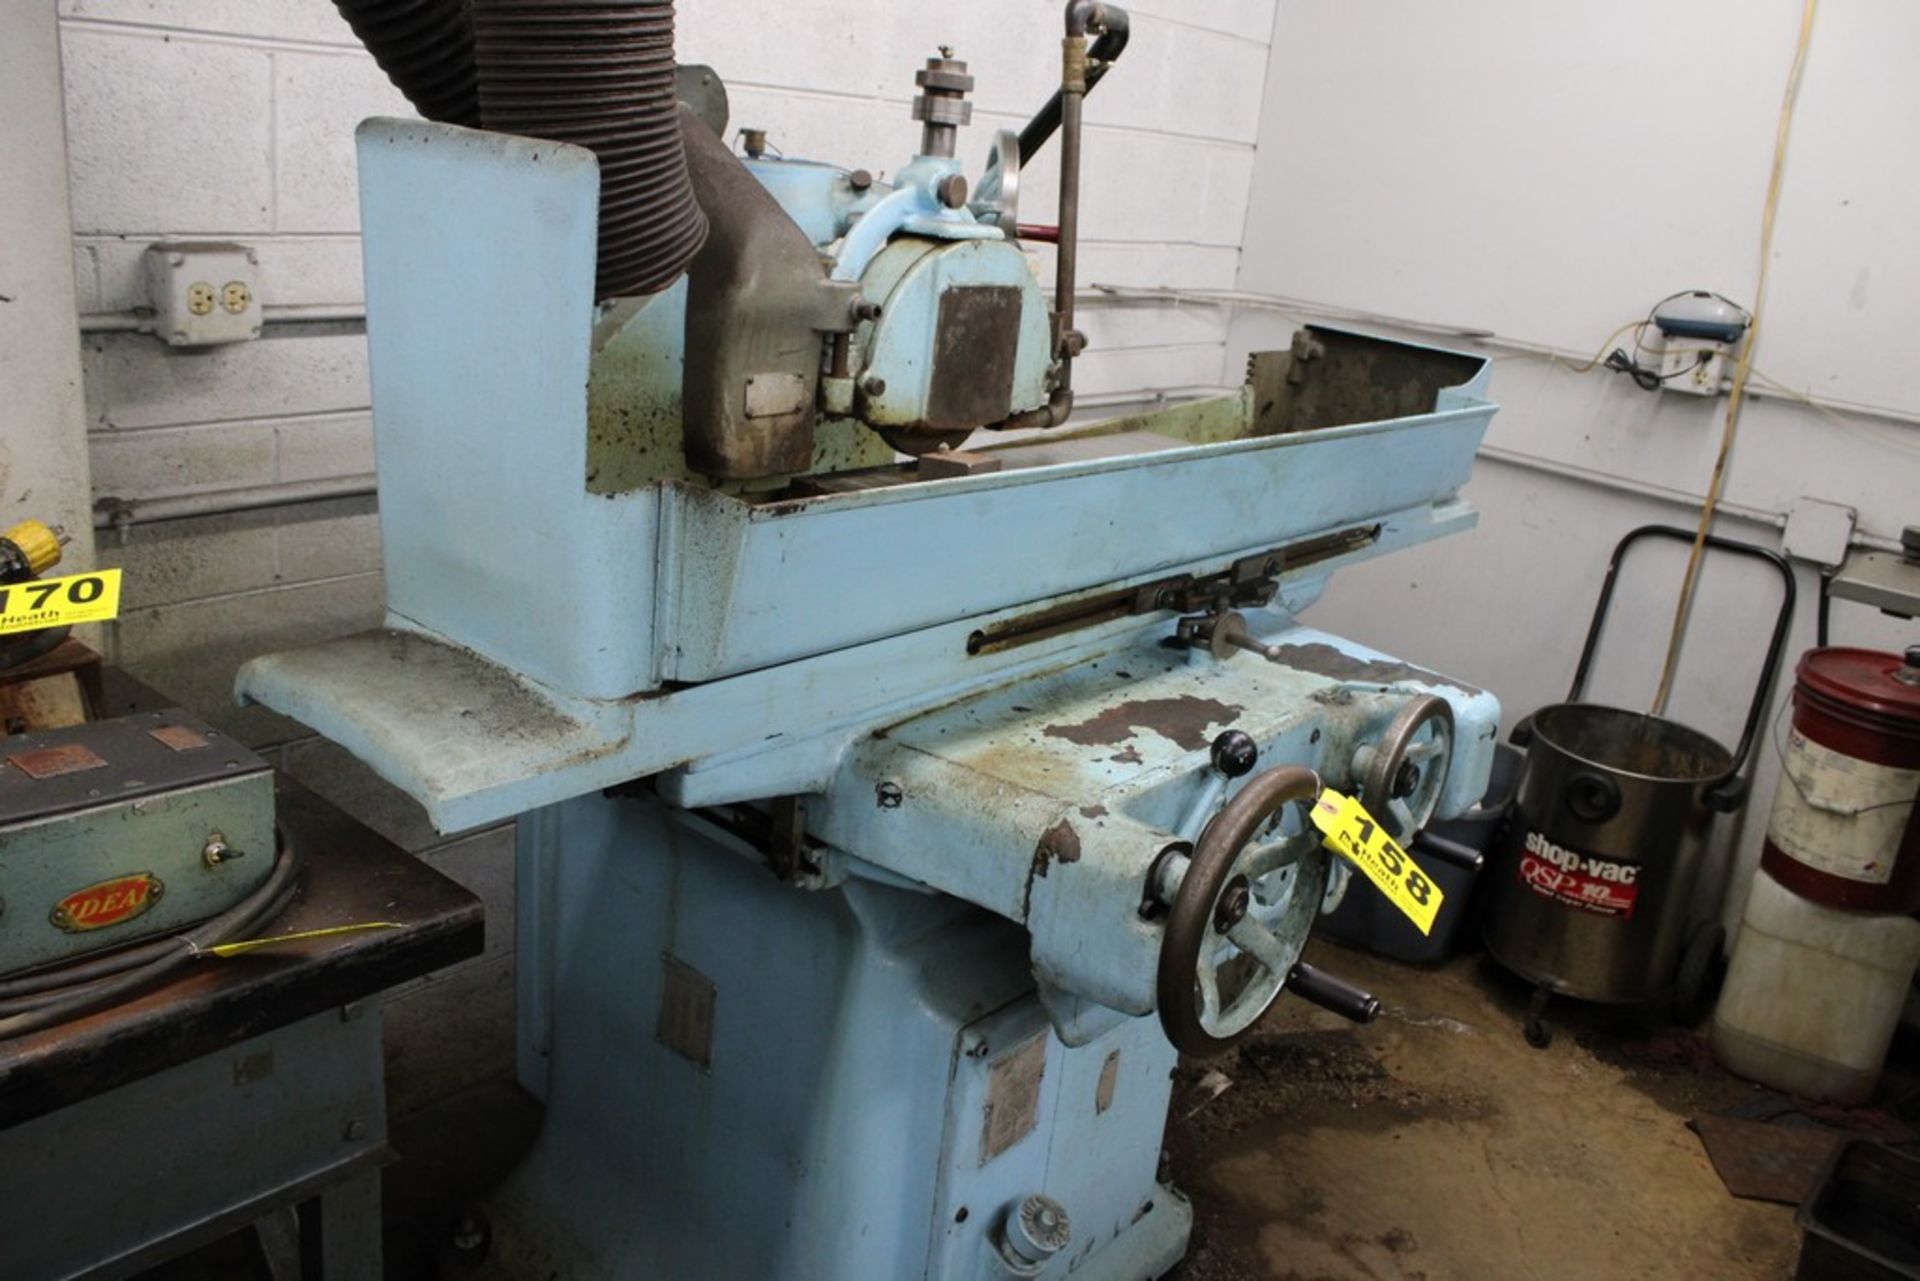 BROWN & SHARPE 8”X24” NO. 5 HYDRAULIC SURFACE GRINDER WITH ELECTRO MAGNETIC CHUCK